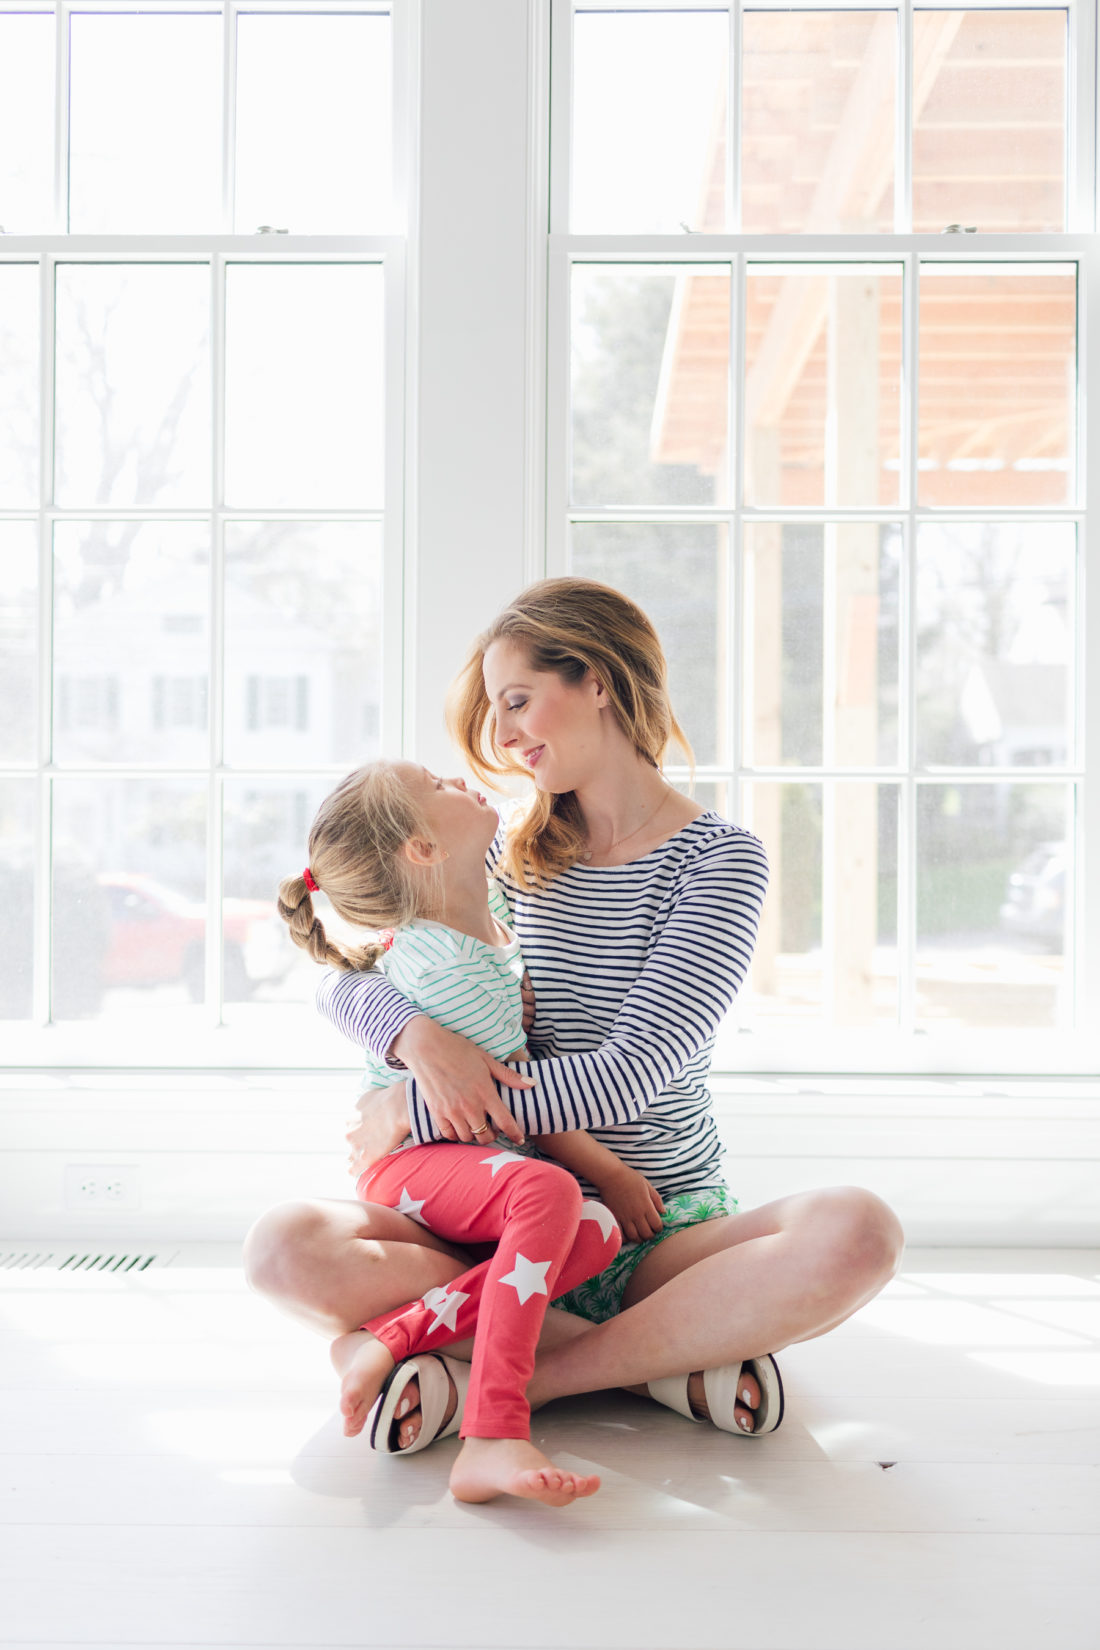 Eva Amurri Martino of Happily Eva After cradles her daughter Marlowe on the floor of their new home in Connecticut